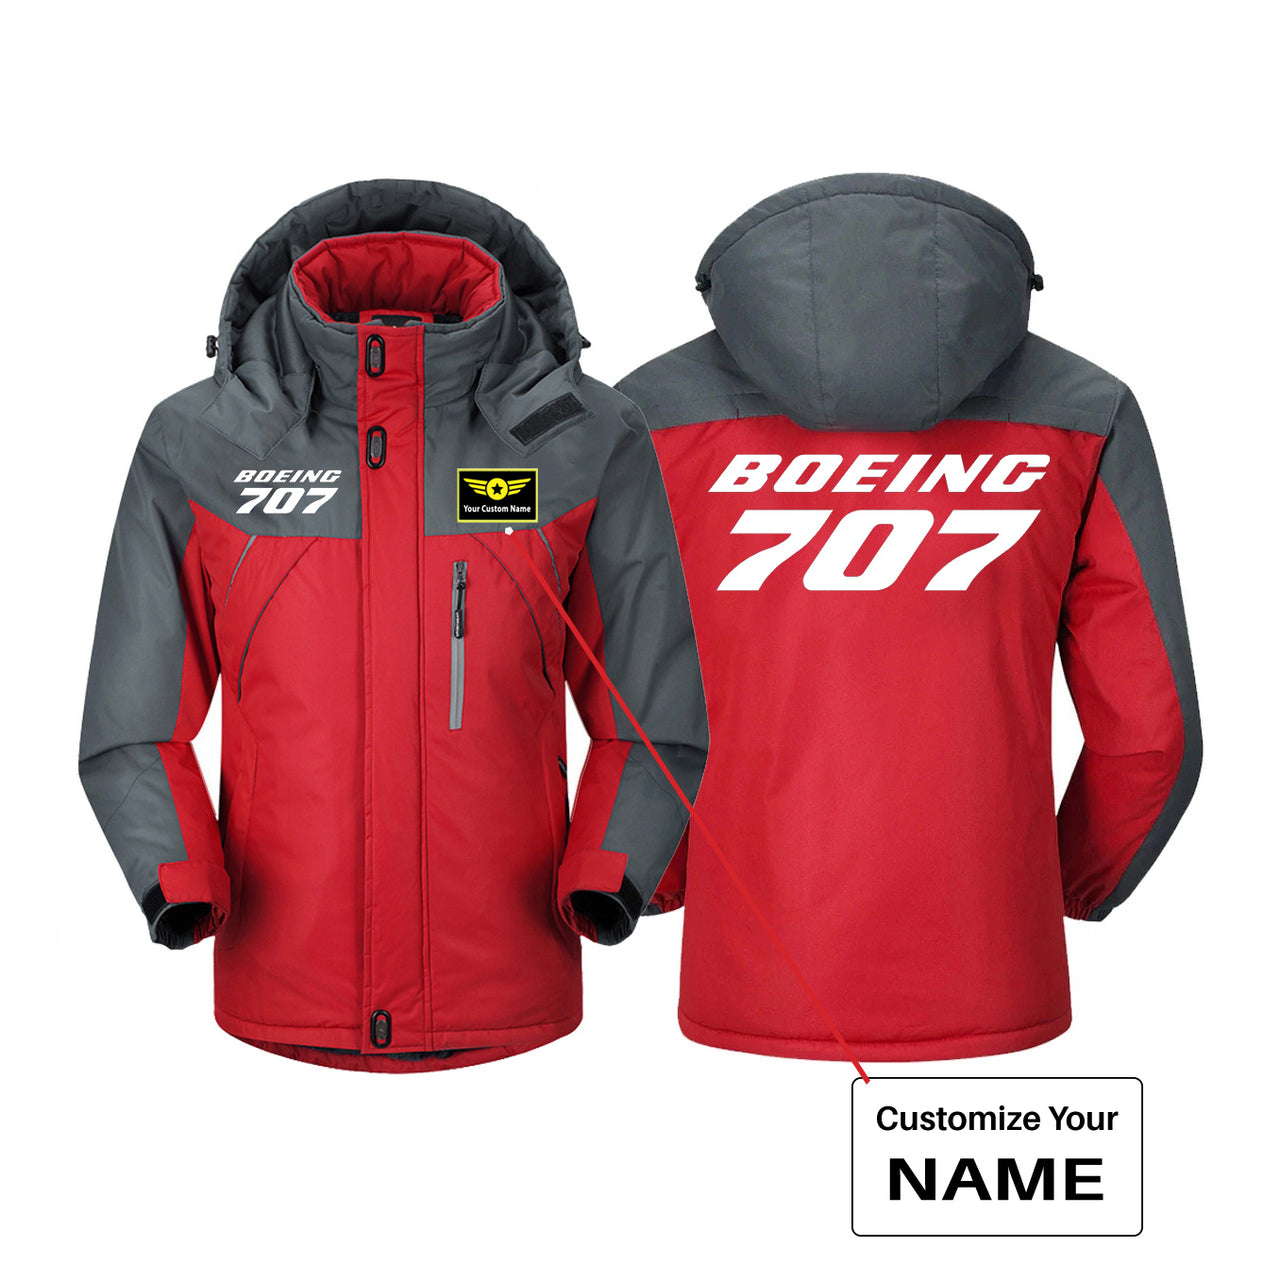 Boeing 707 & Text Designed Thick Winter Jackets